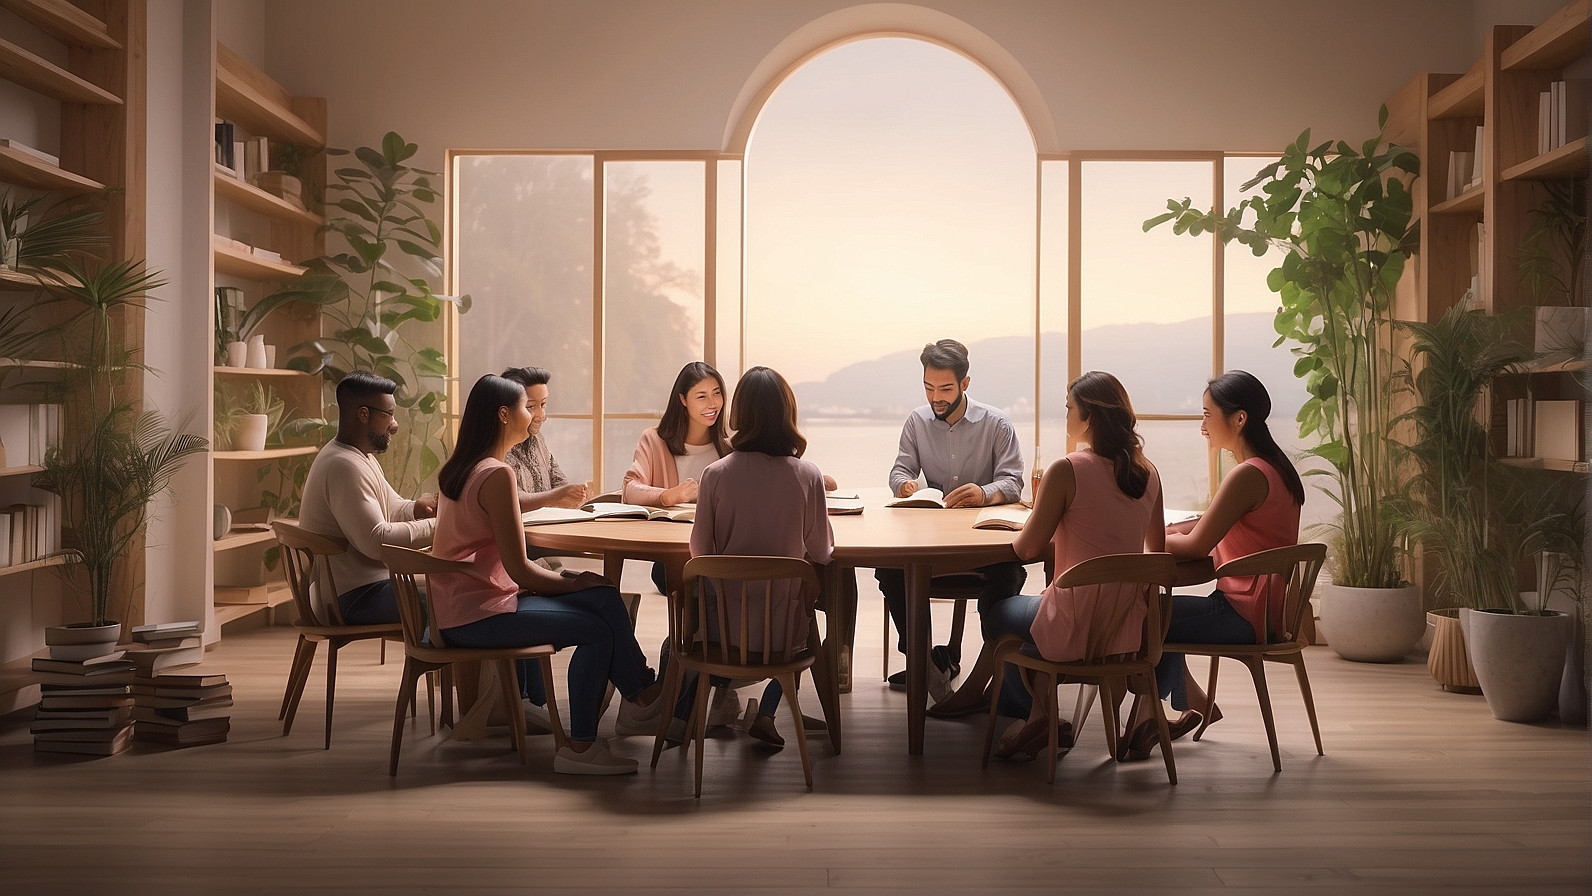 A group of people seated around a table in a casual meeting setting within a church or similar environment.